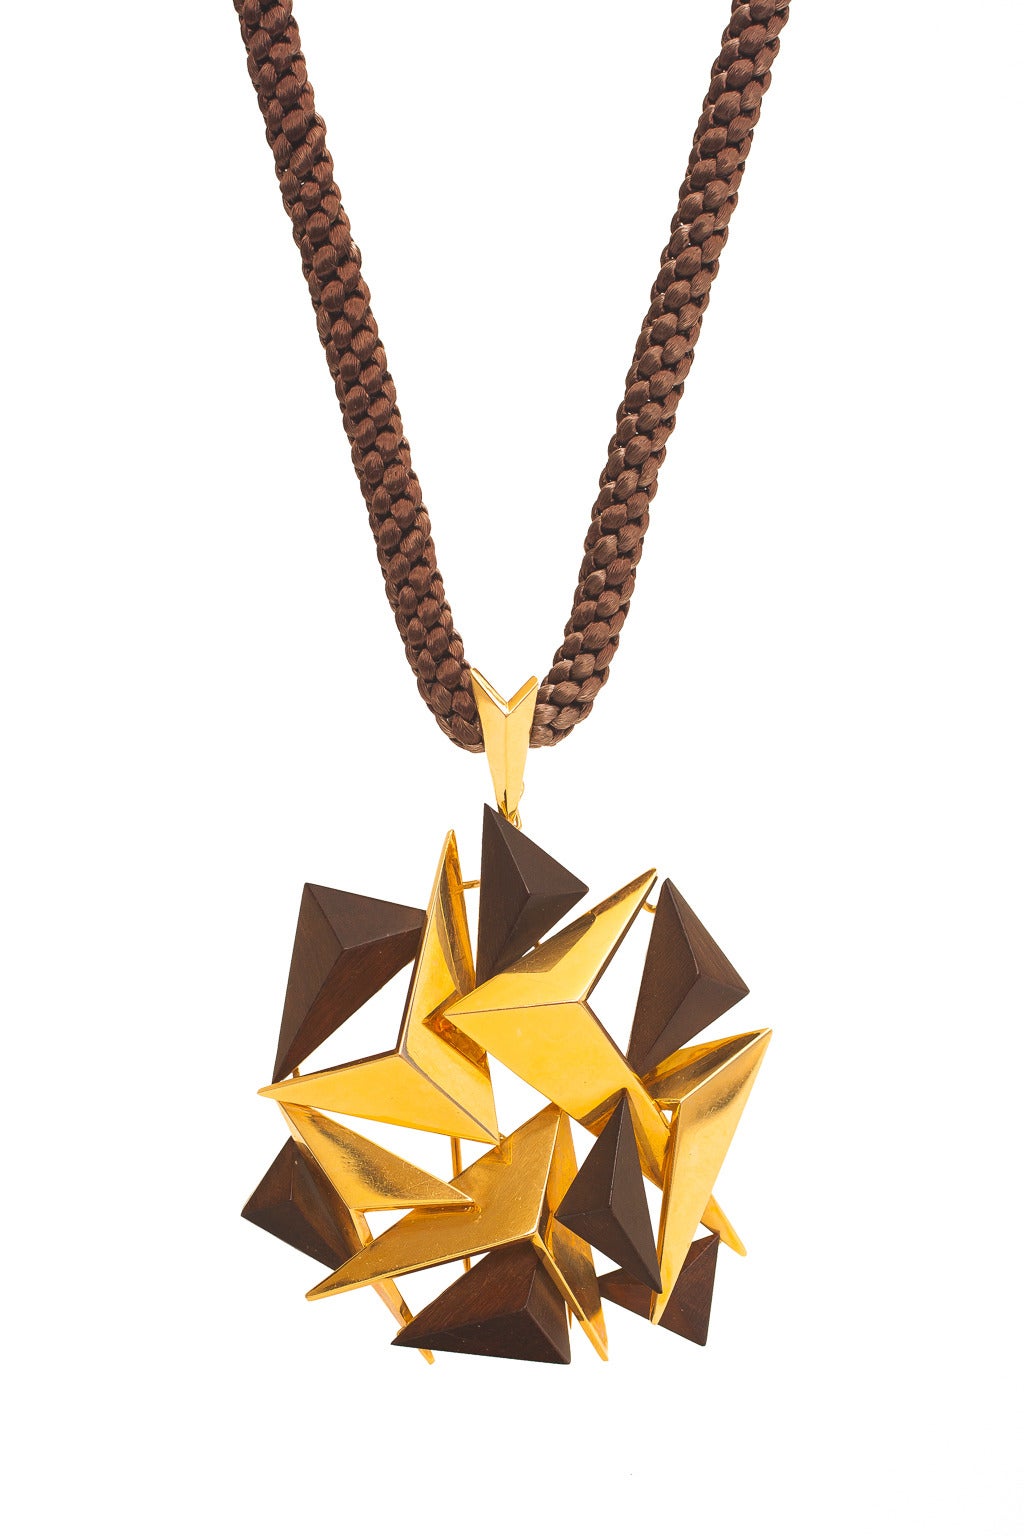 A gold & wood Modernist pendant-brooch on a silk cord by Fred Paris, composed of a cluster of various sizes of triangular forms of 18 karat yellow gold and wood, accompanied by finely braided dark brown silk cord. The pendant is fitted with a bail